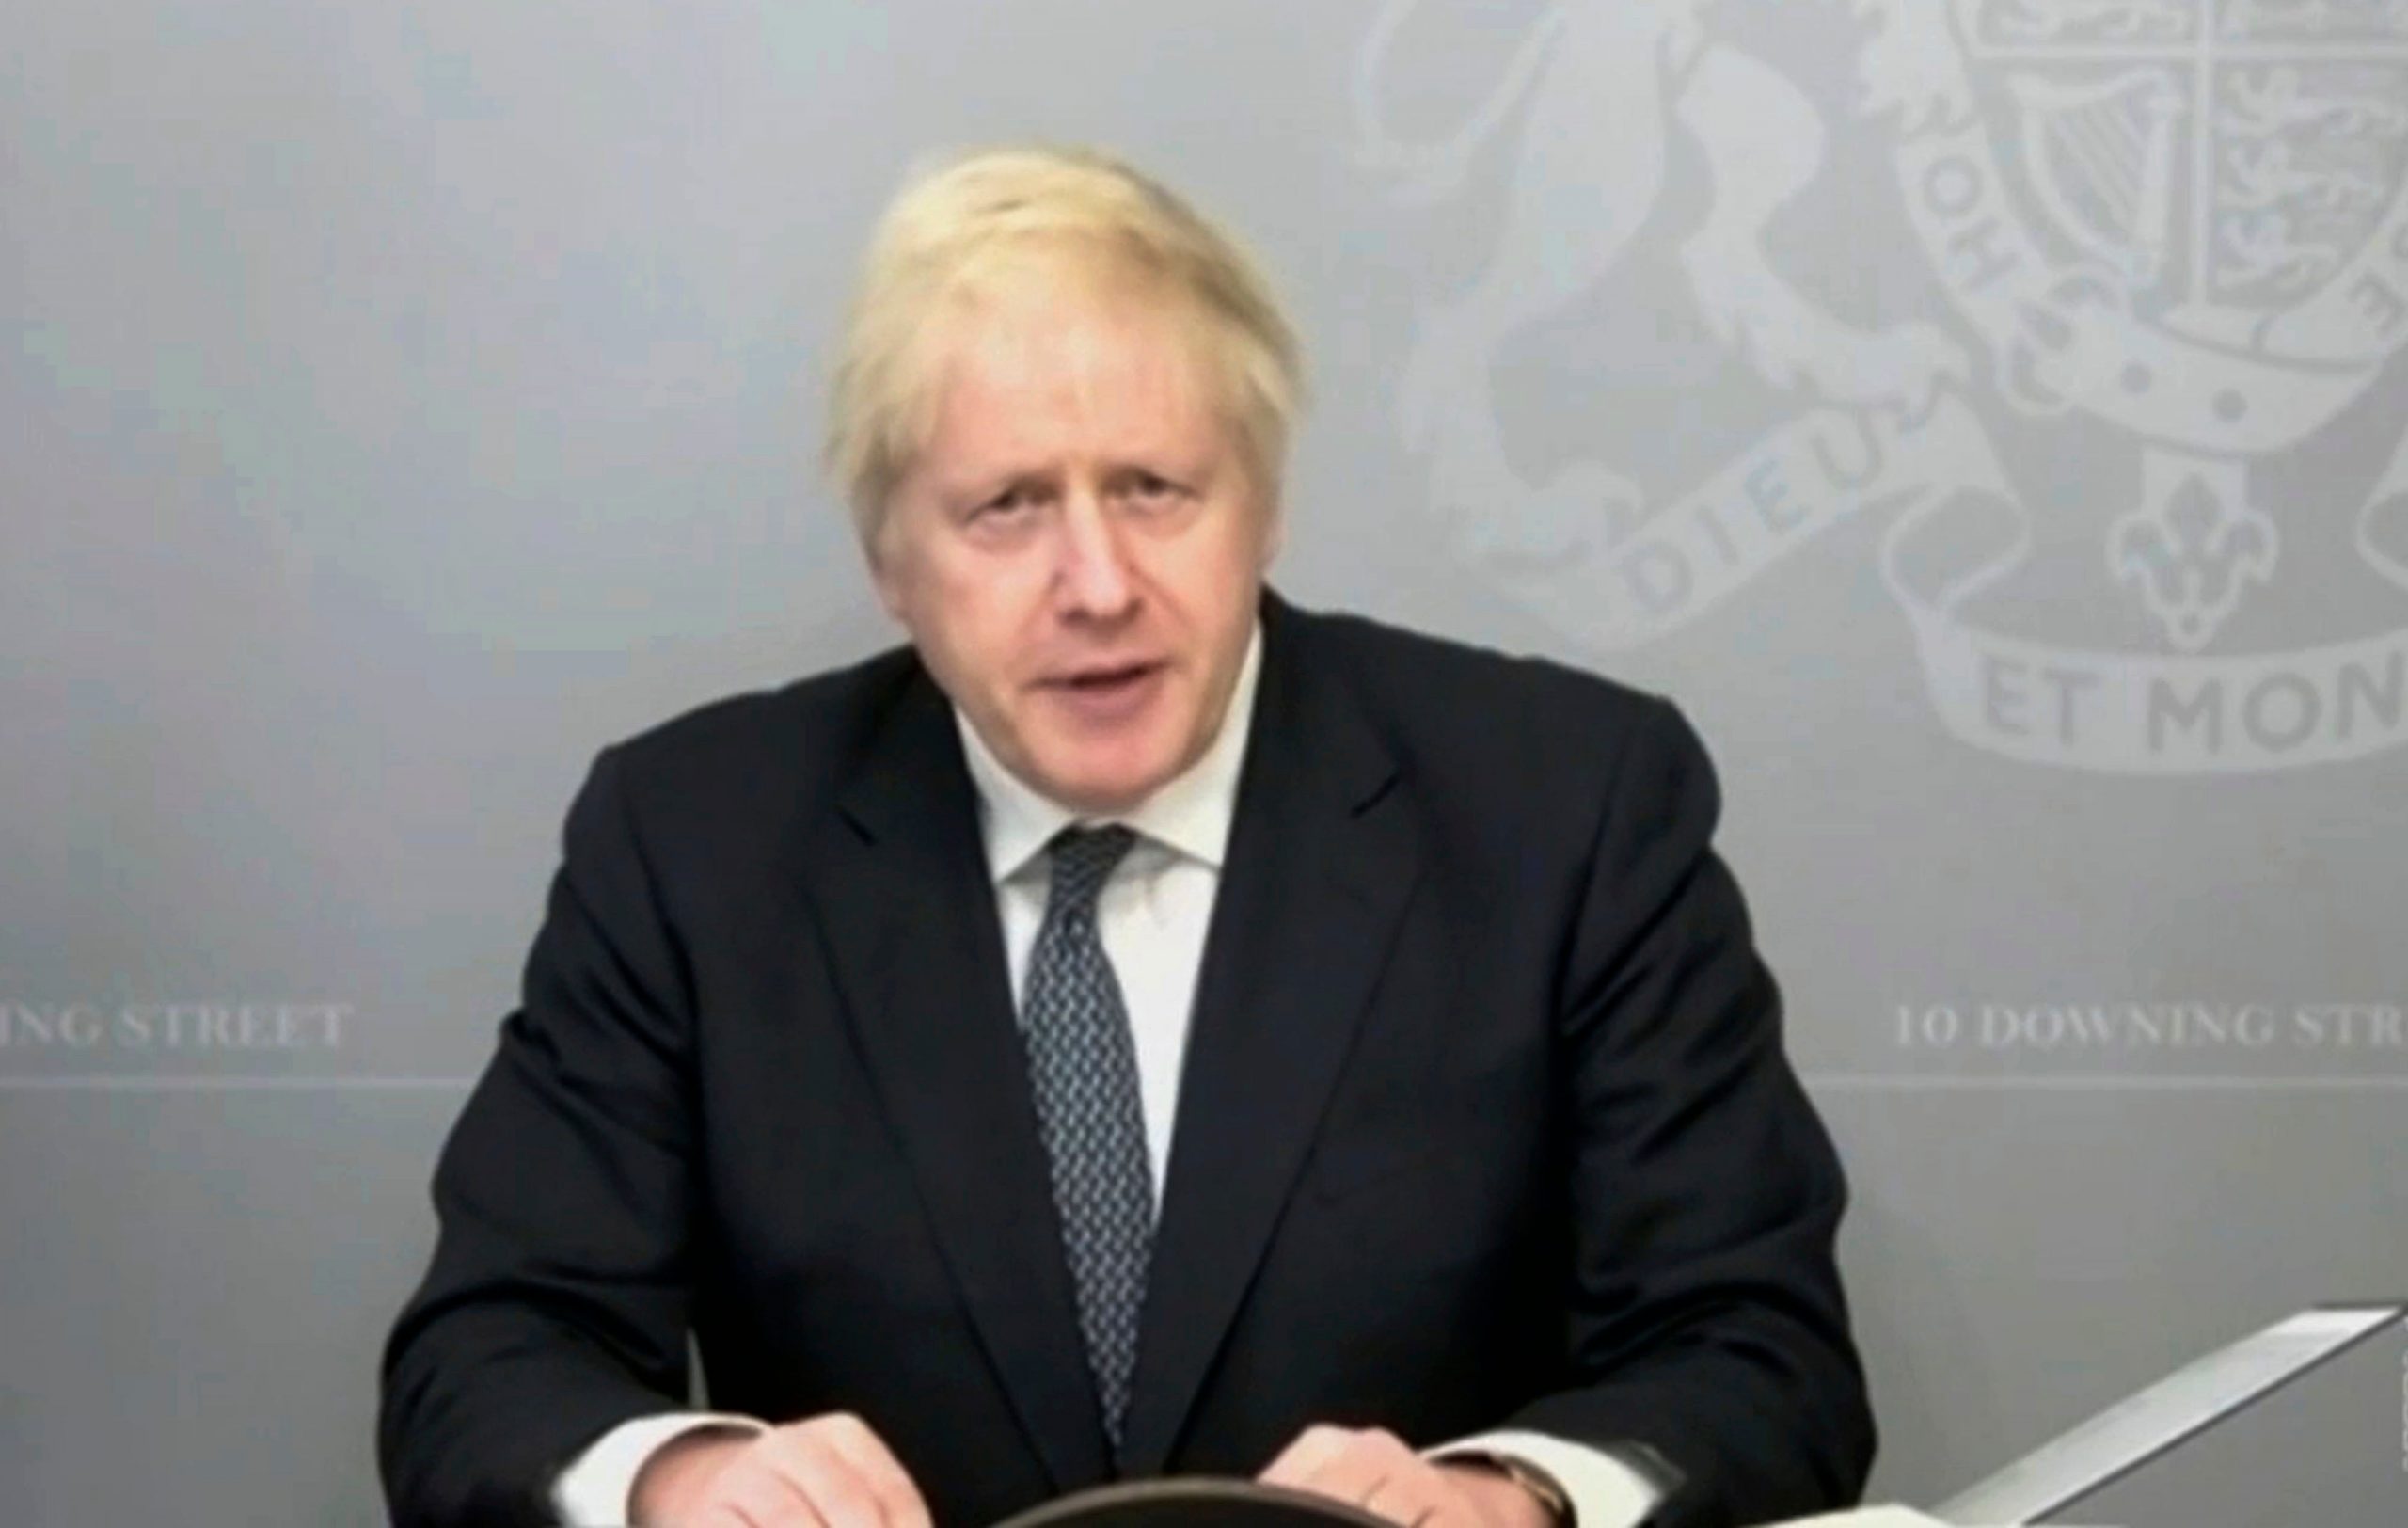 Former UK prime ministers warn Boris Johnson against cuts to foreign aid